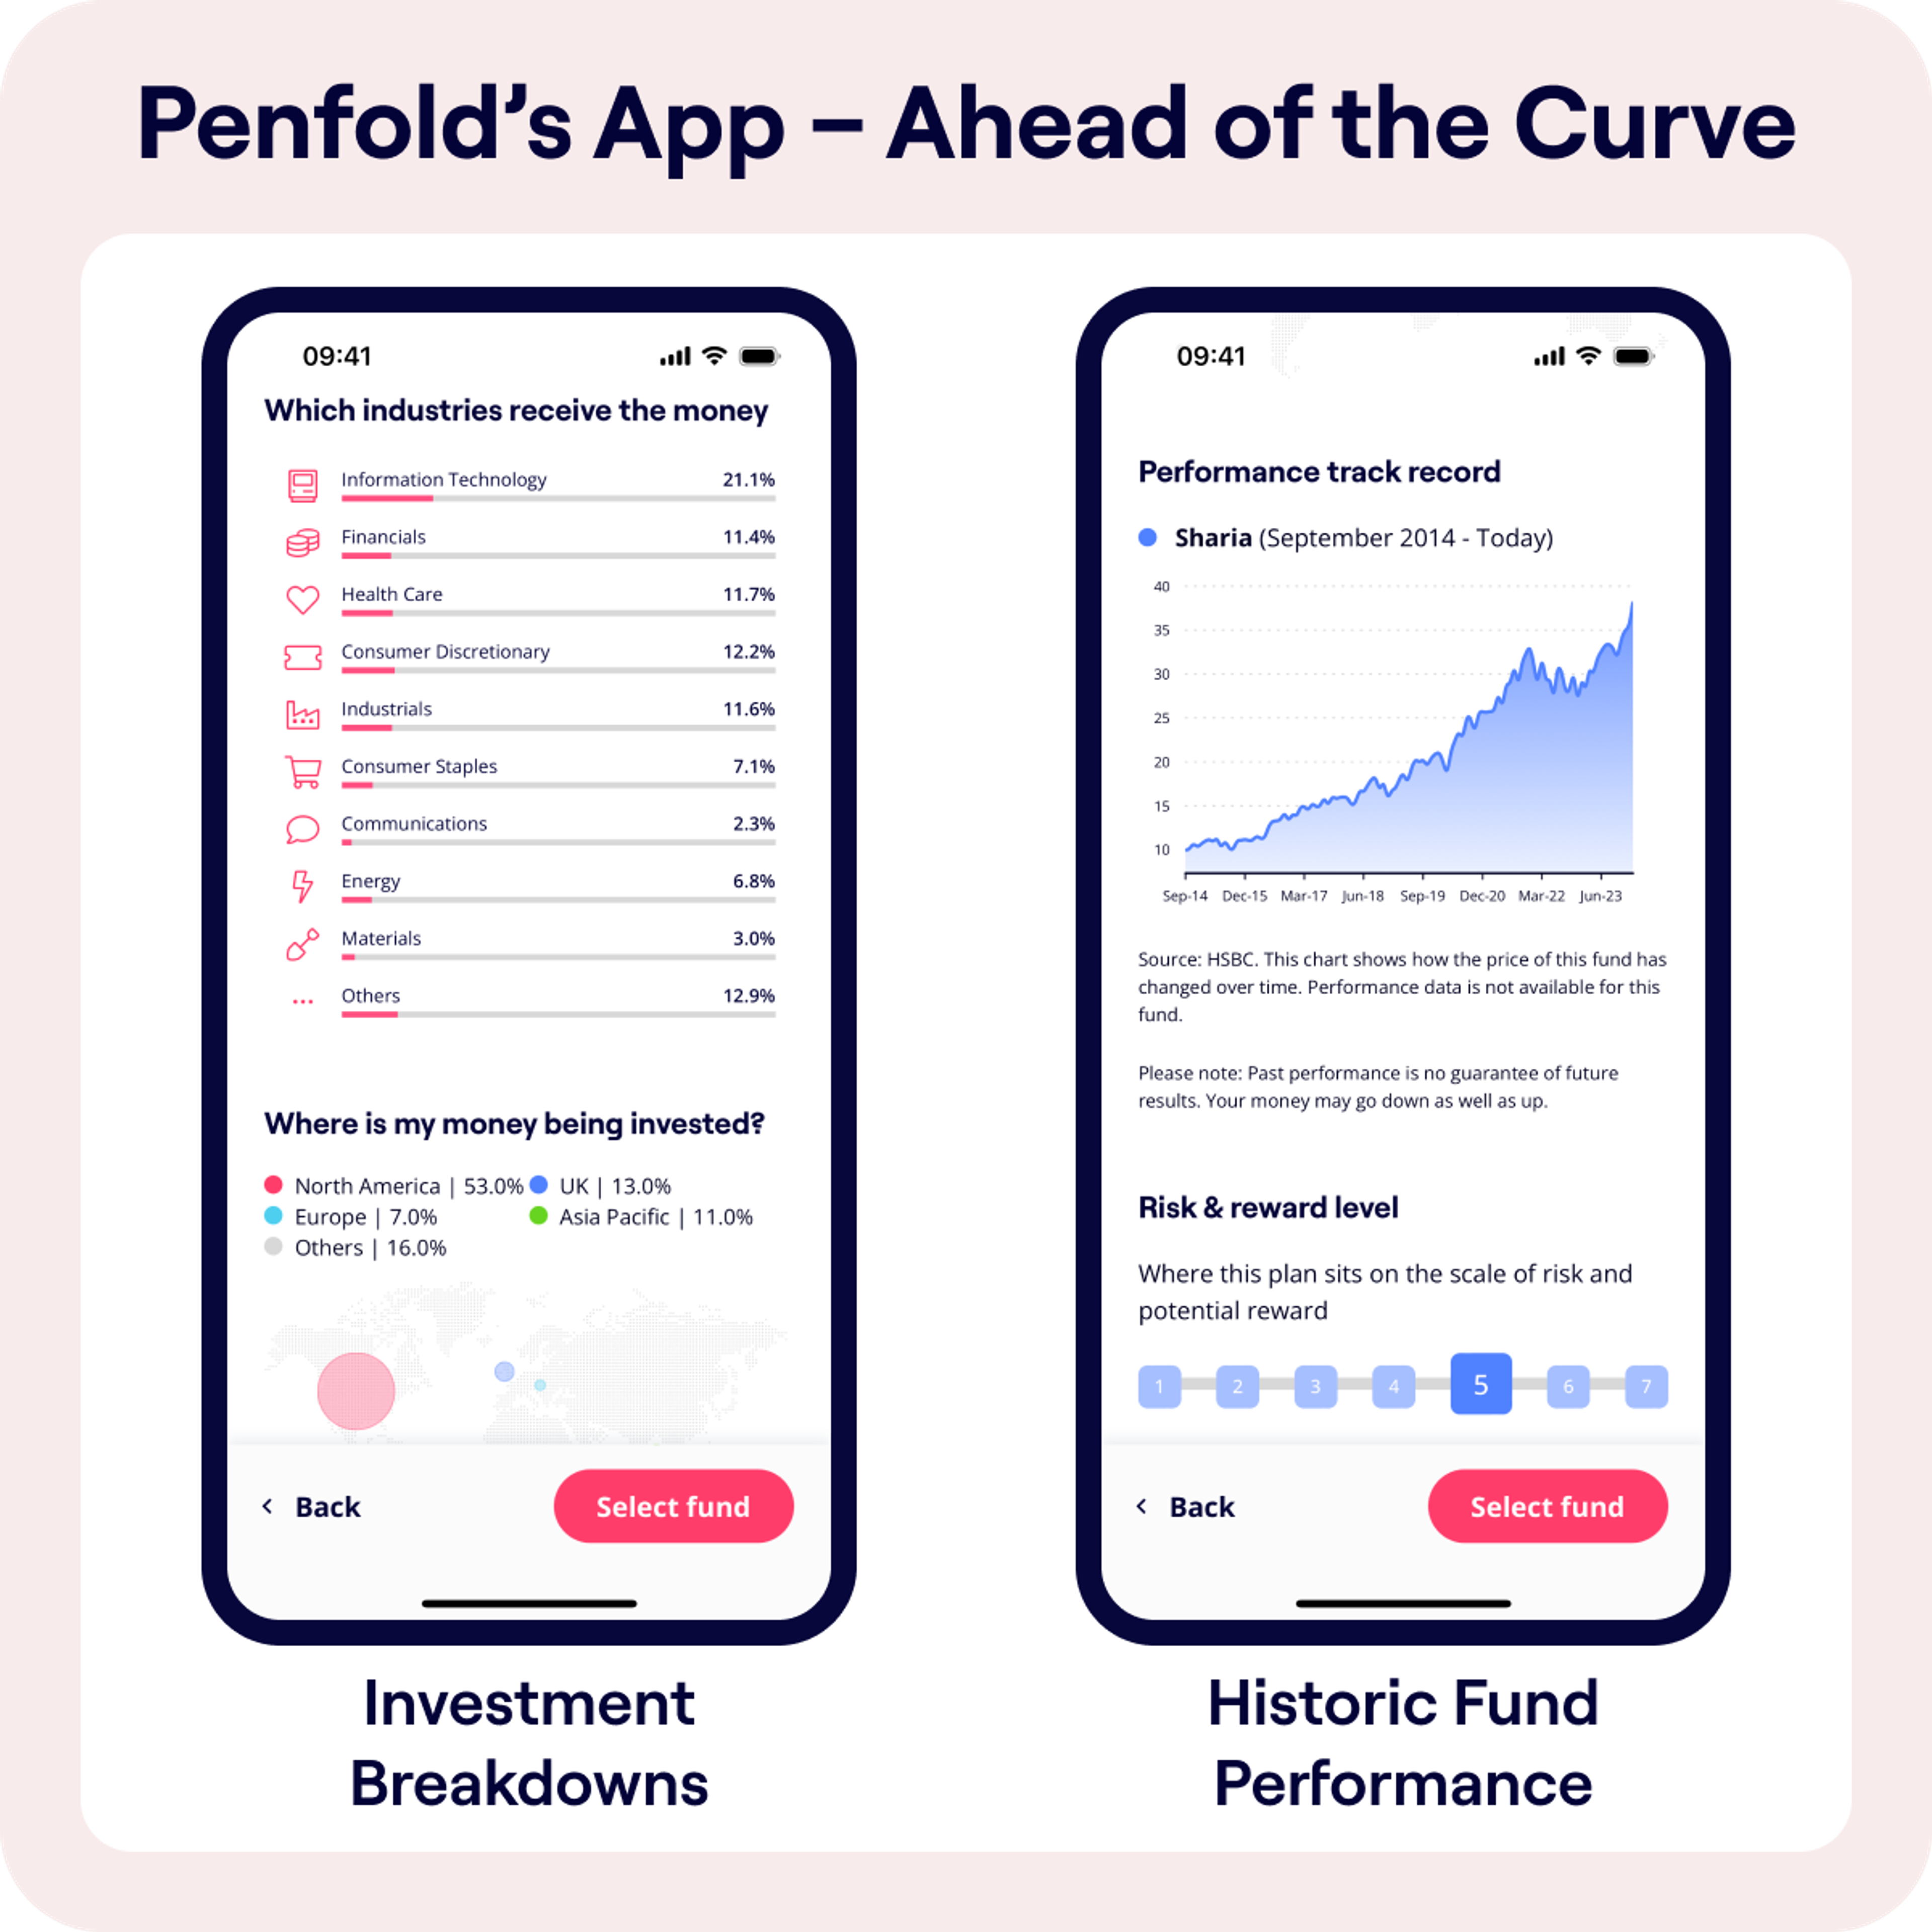 The image has a heading "Penfold's App - Ahead of the Curve" and displays a mock-up of Penfold's App with two sections. On the left, 'Investment Breakdowns' show industry investment percentages, with Information Technology at 21.1% being the highest, and a geographic investment distribution with 53.0% in North America. On the right, 'Historic Fund Performance' presents a line graph for a Sharia fund from September 2014 to present, trending upward. 